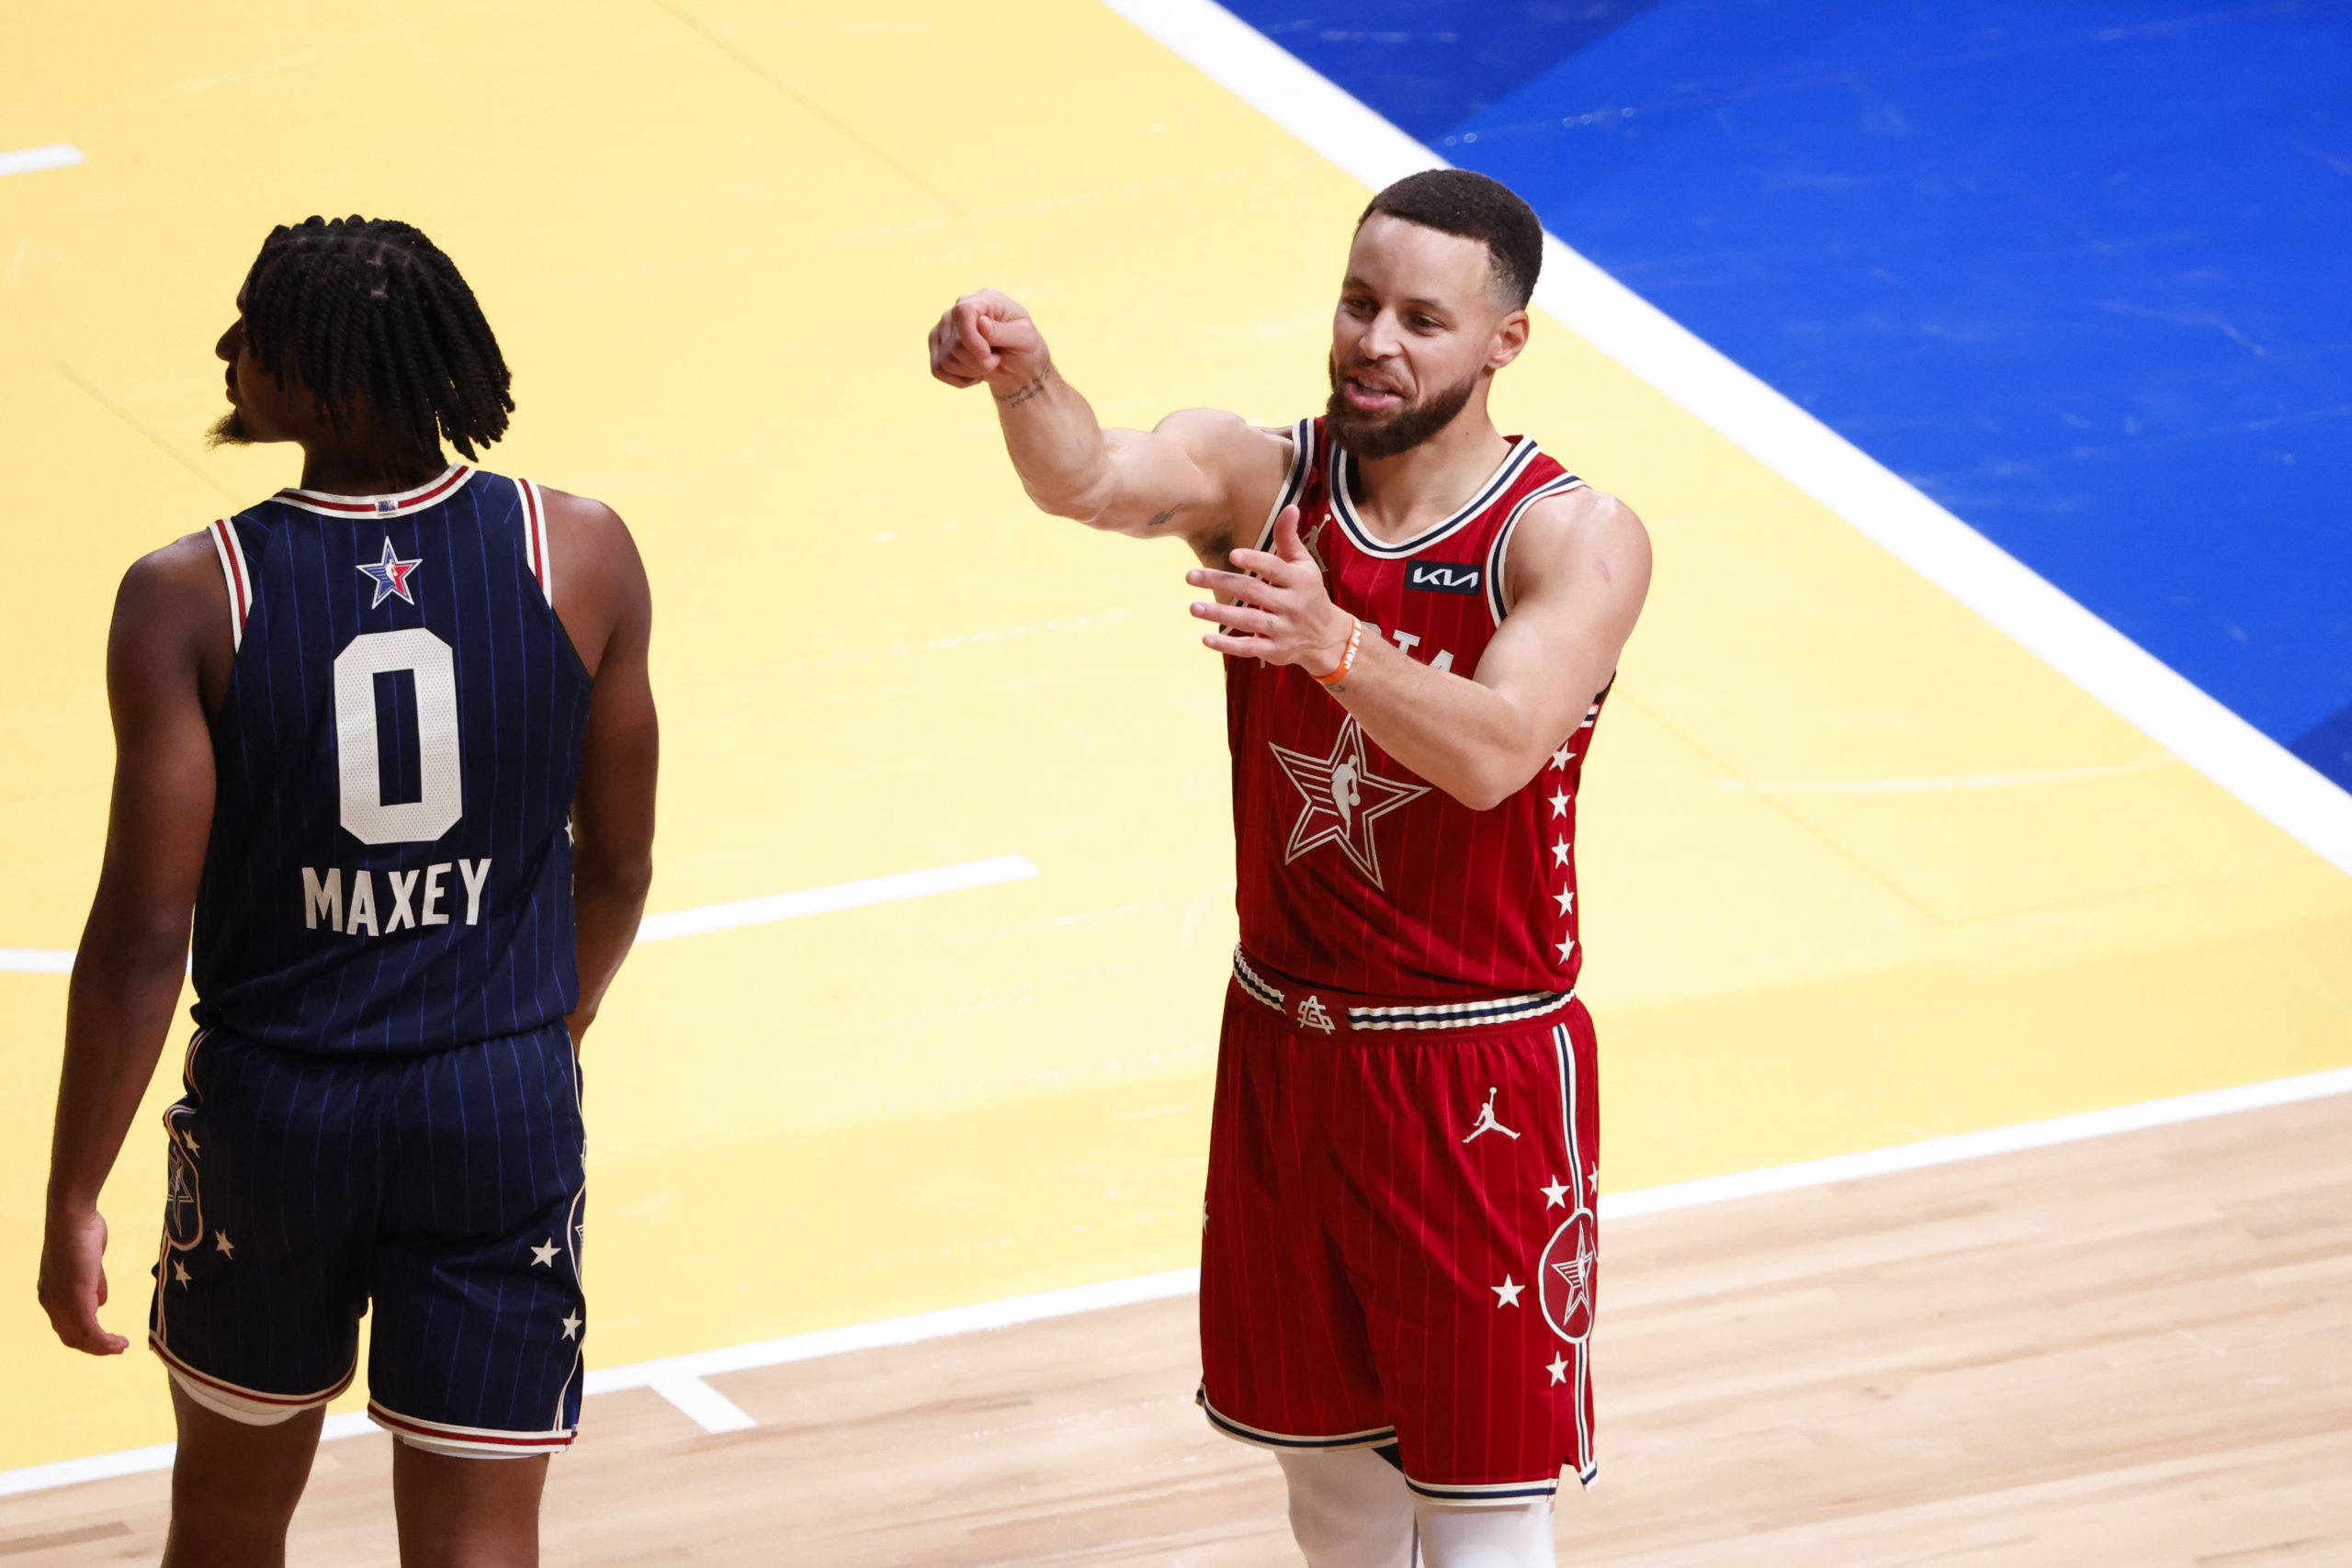 INDIANAPOLIS, INDIANA - FEBRUARY 18: Stephen Curry #30 of the Golden State Warriors and Western Conference All-Stars reacts in the second quarter against the Eastern Conference All-Stars during the 2024 NBA All-Star Game at Gainbridge Fieldhouse on February 18, 2024 in Indianapolis, Indiana. Justin Casterline/Getty Images